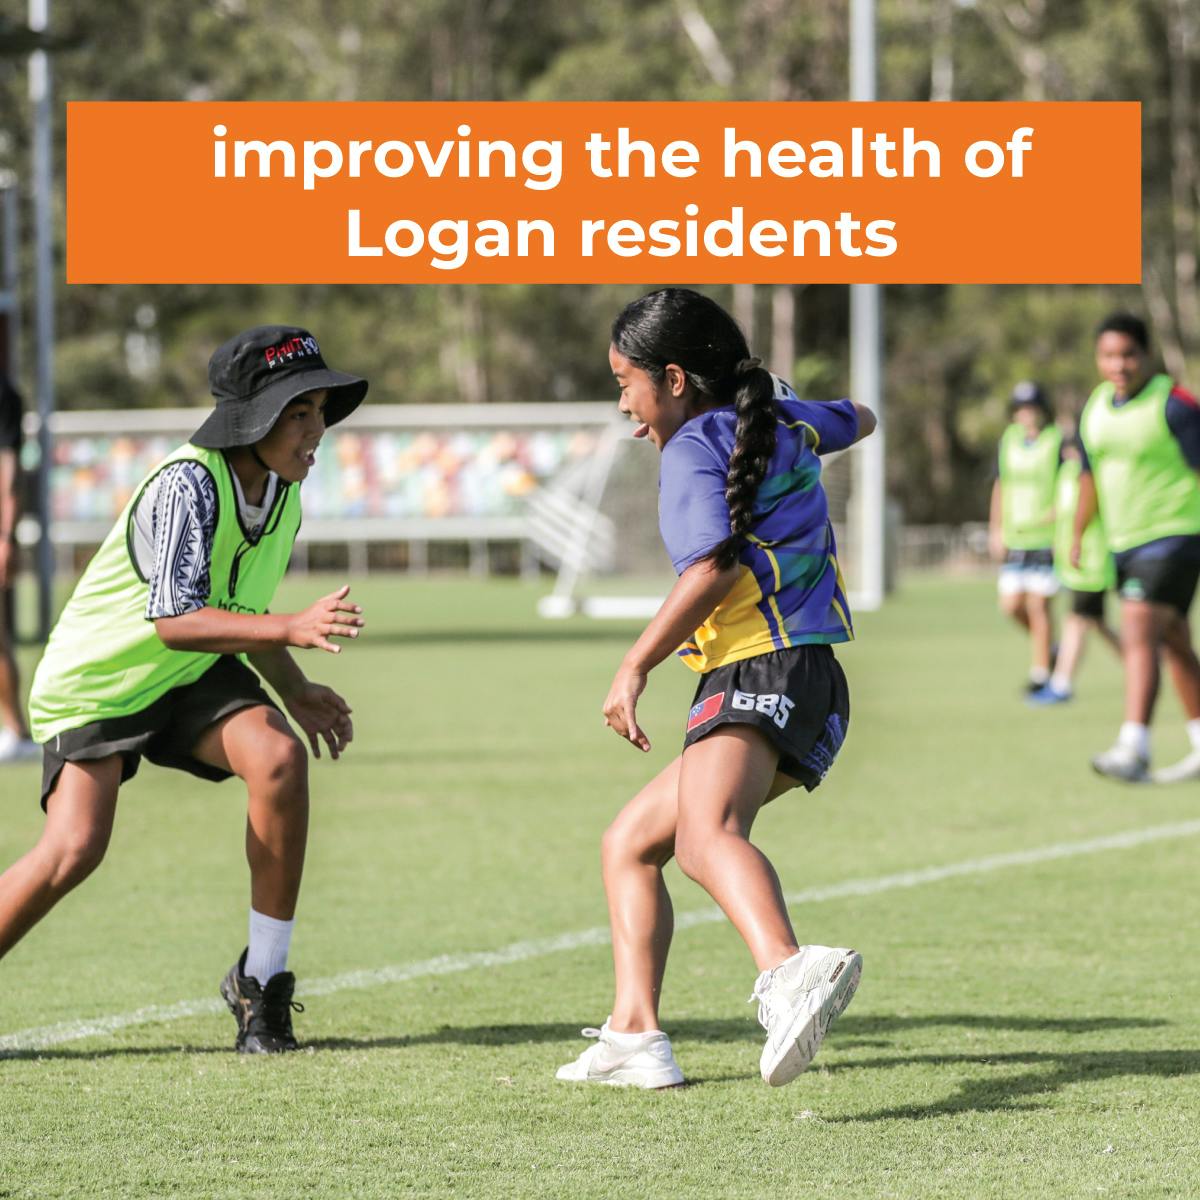 Objective 4 - improving the health of Logan residents